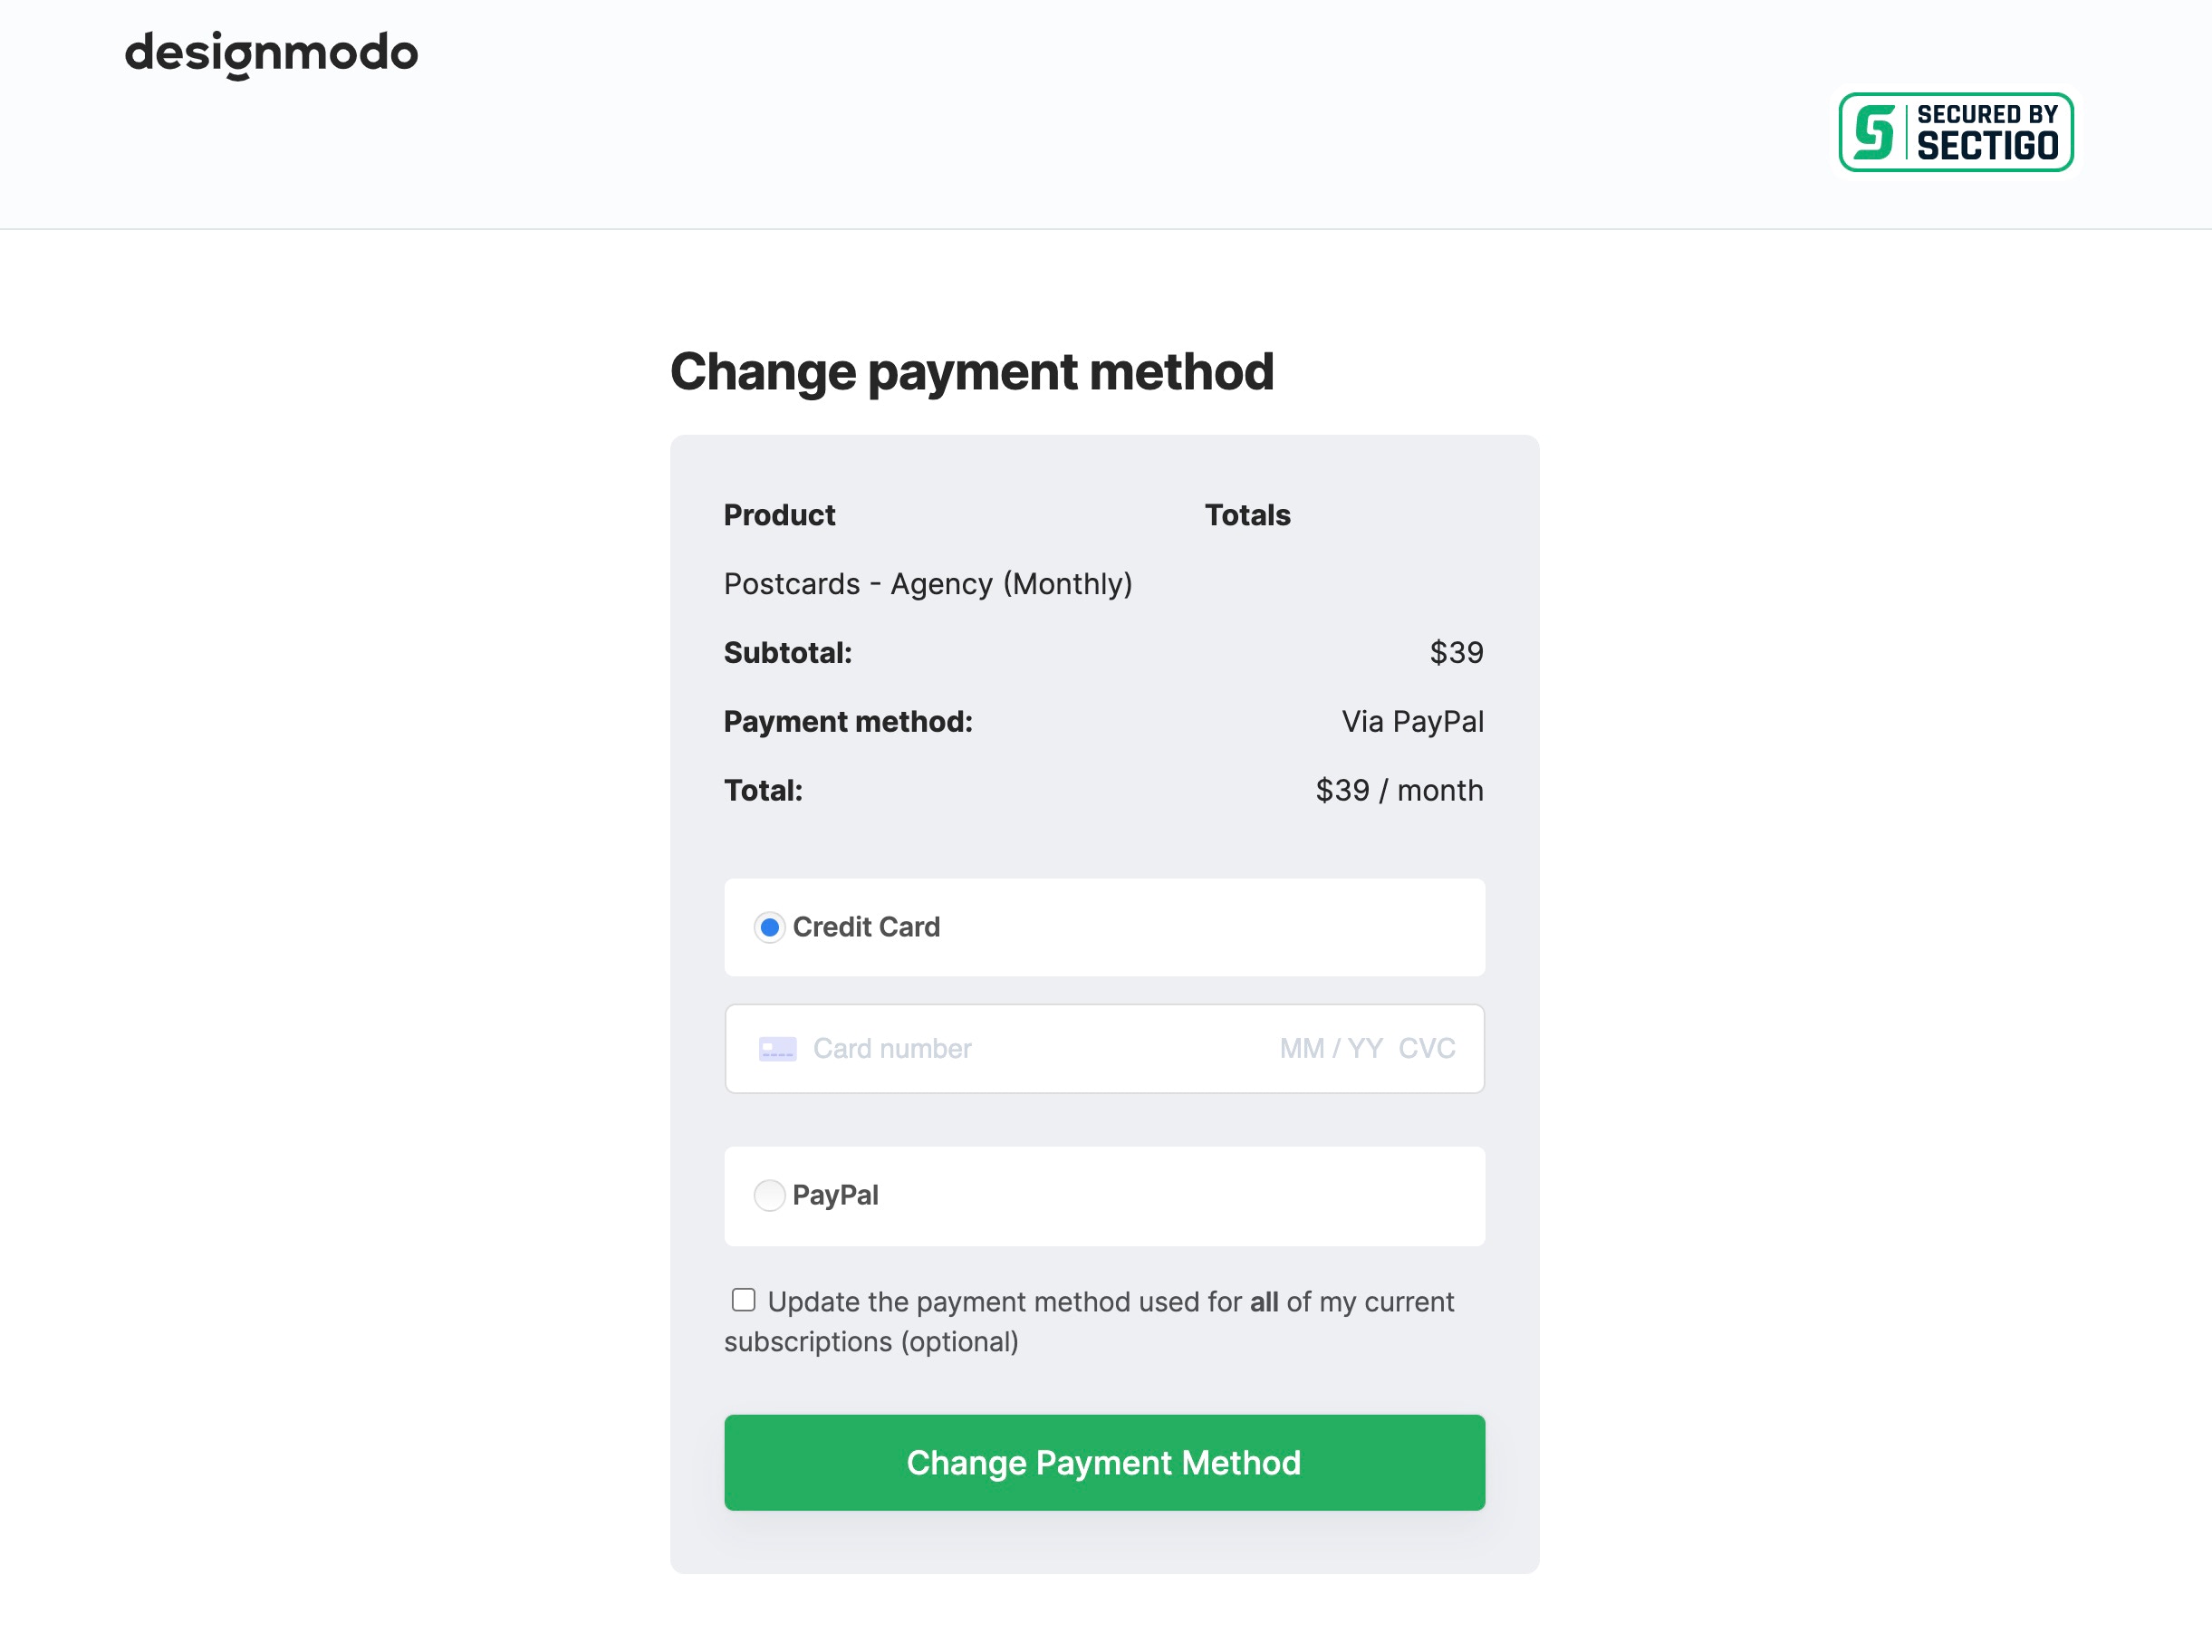 How to Change the Payment Method on Designmodo, 3